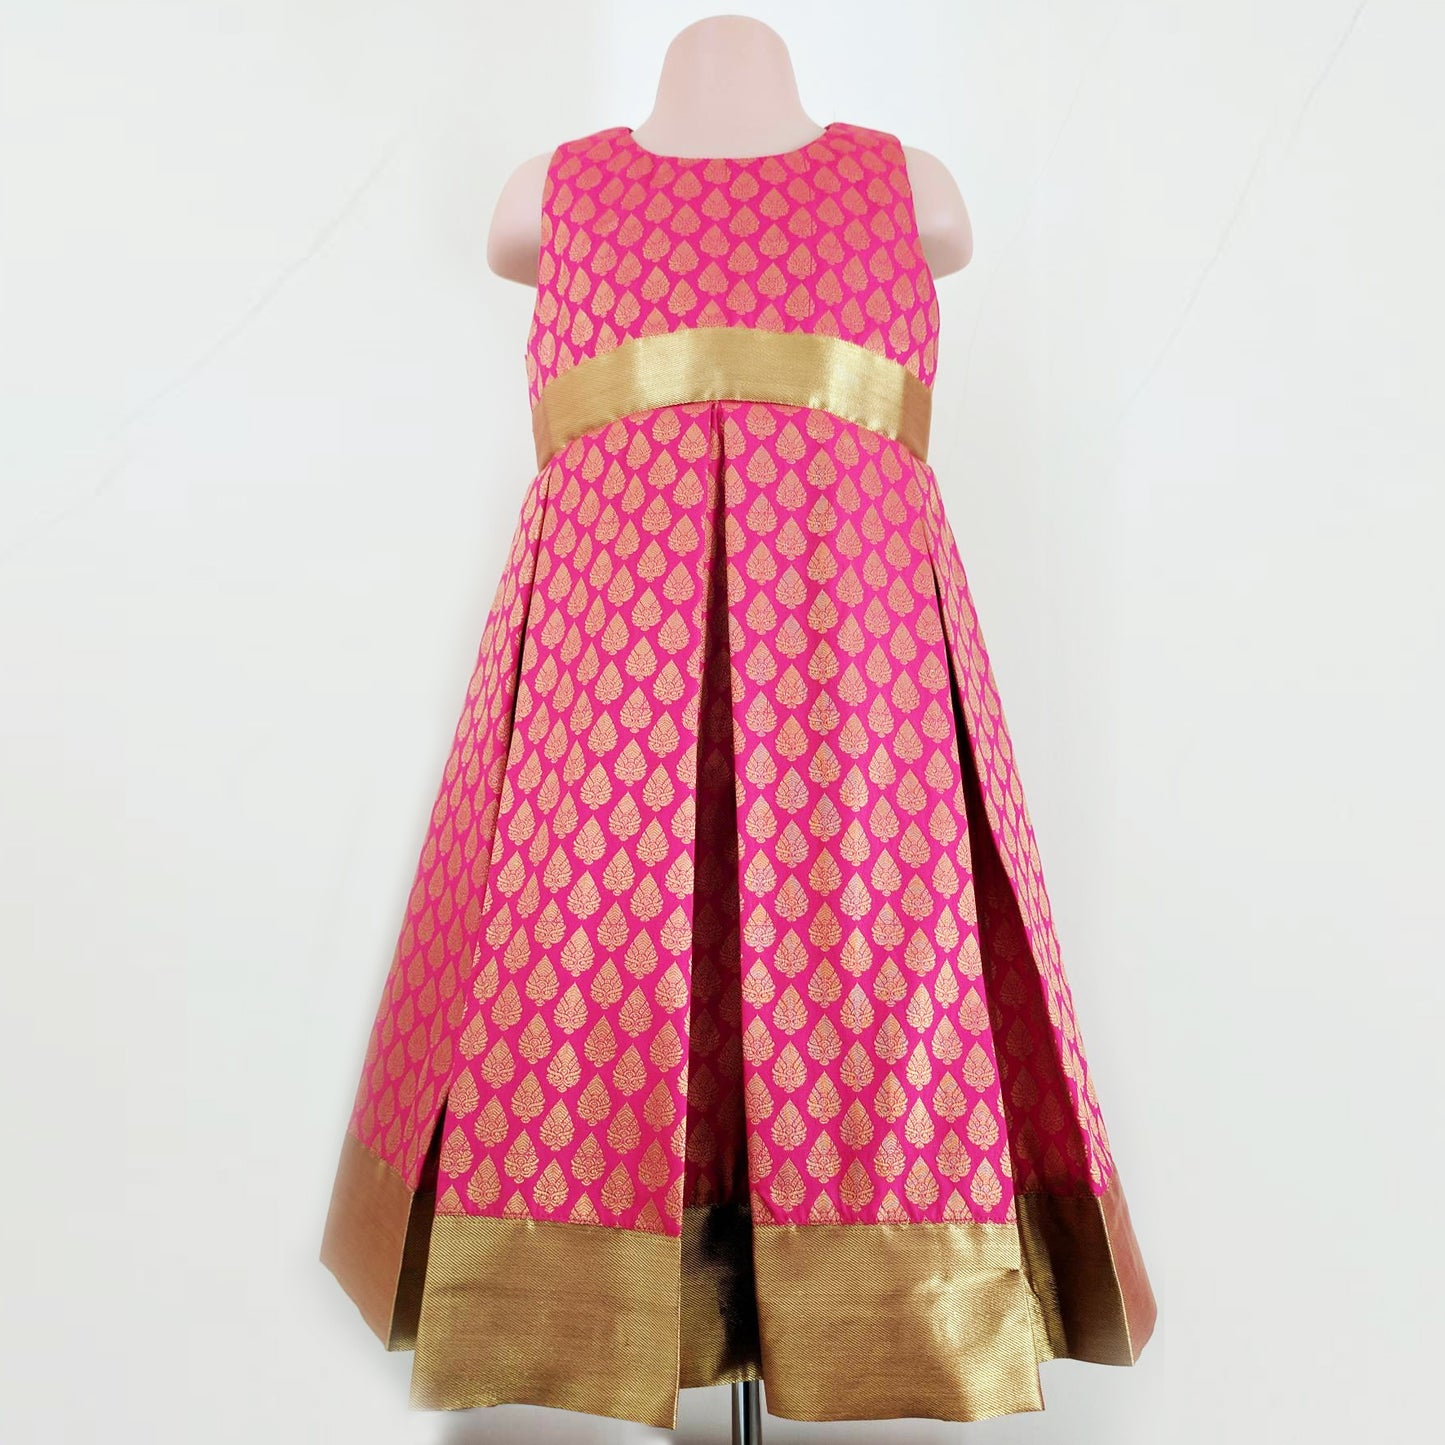 Girl's Party Dress In Pink And Gold